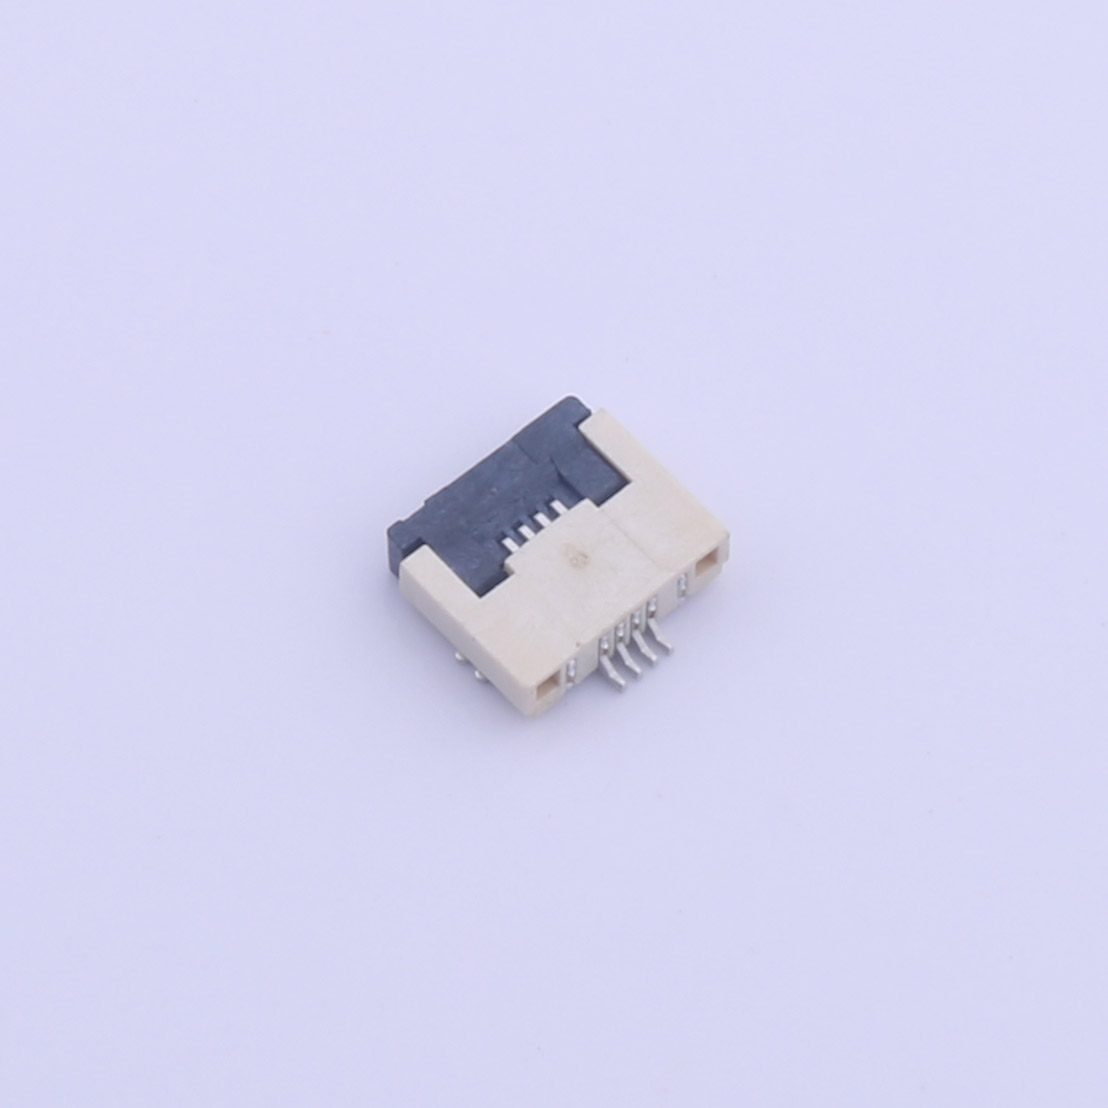 Kinghelm 0.5mm Pitch FPC FFC Connector 14P Height 2mm Front Flip Bottom Contact SMT FPC Connector